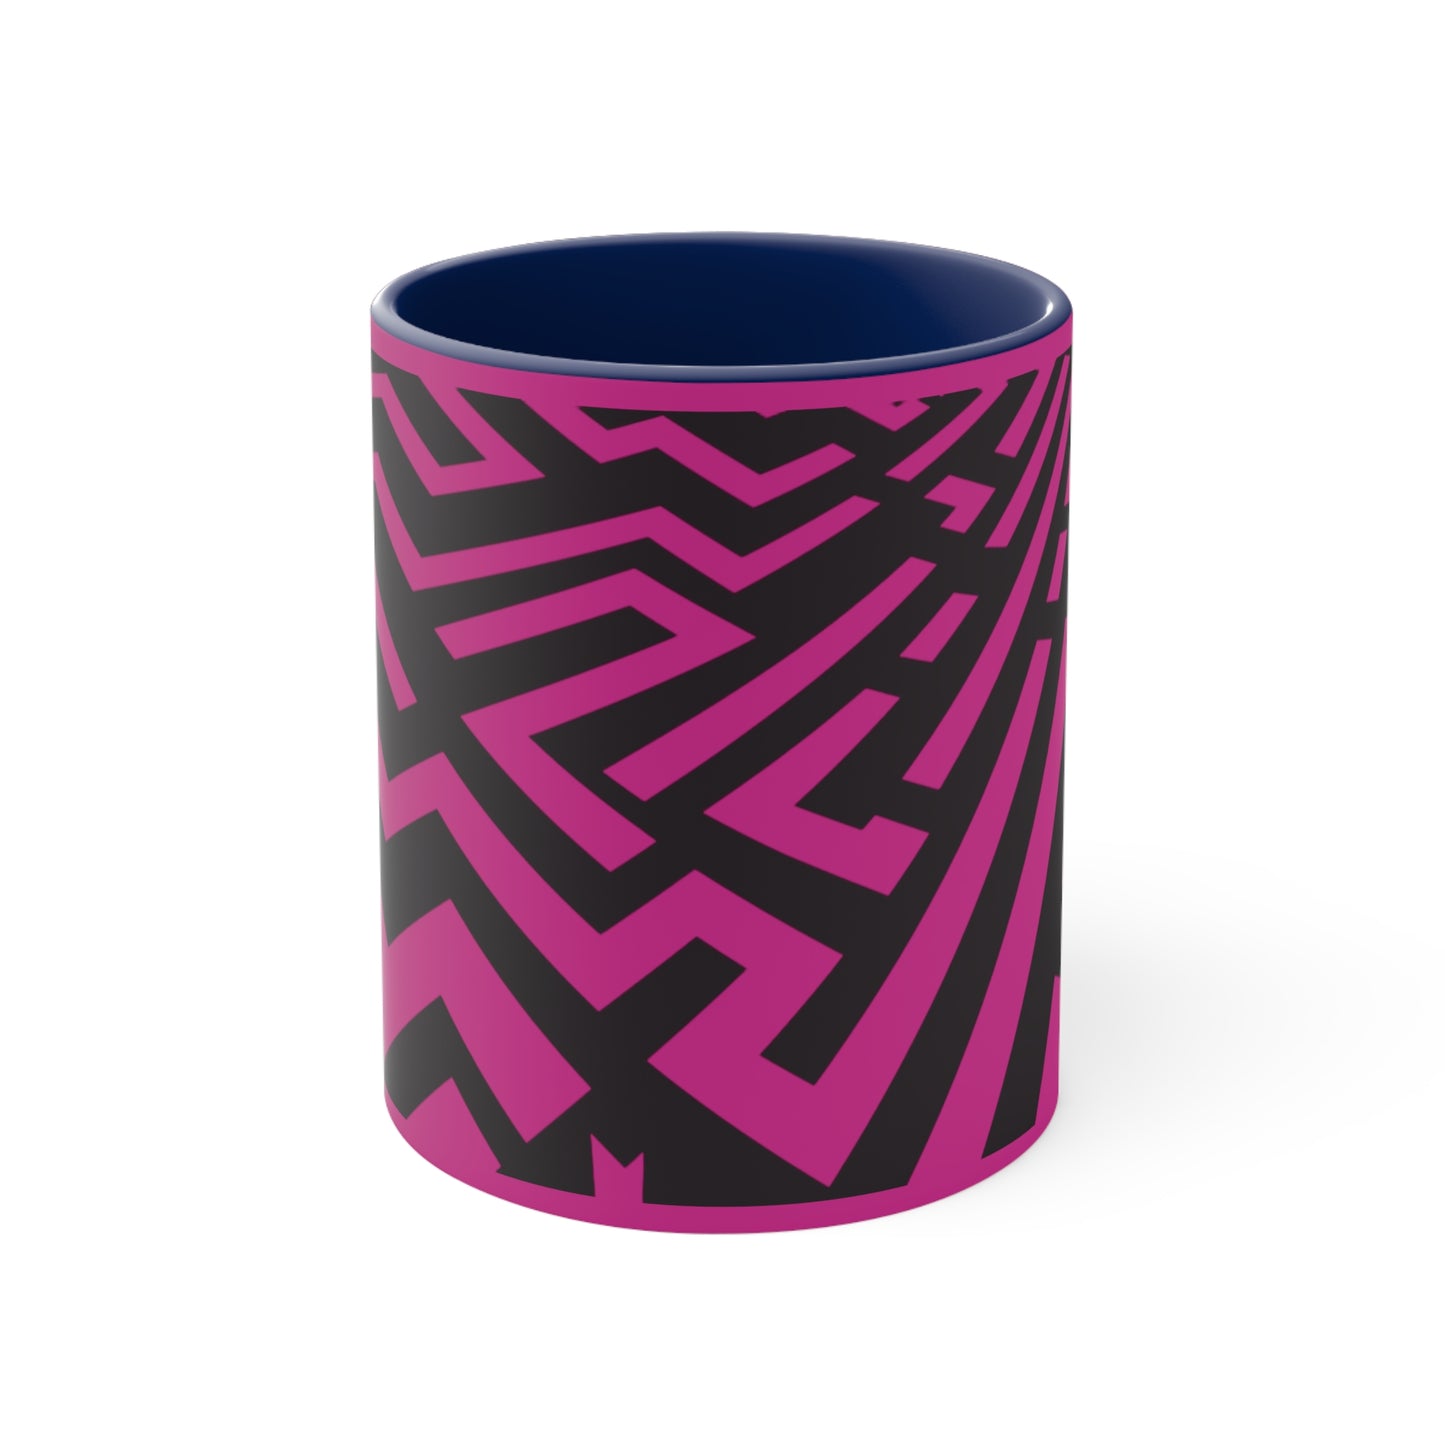 Maze 1 in Pink